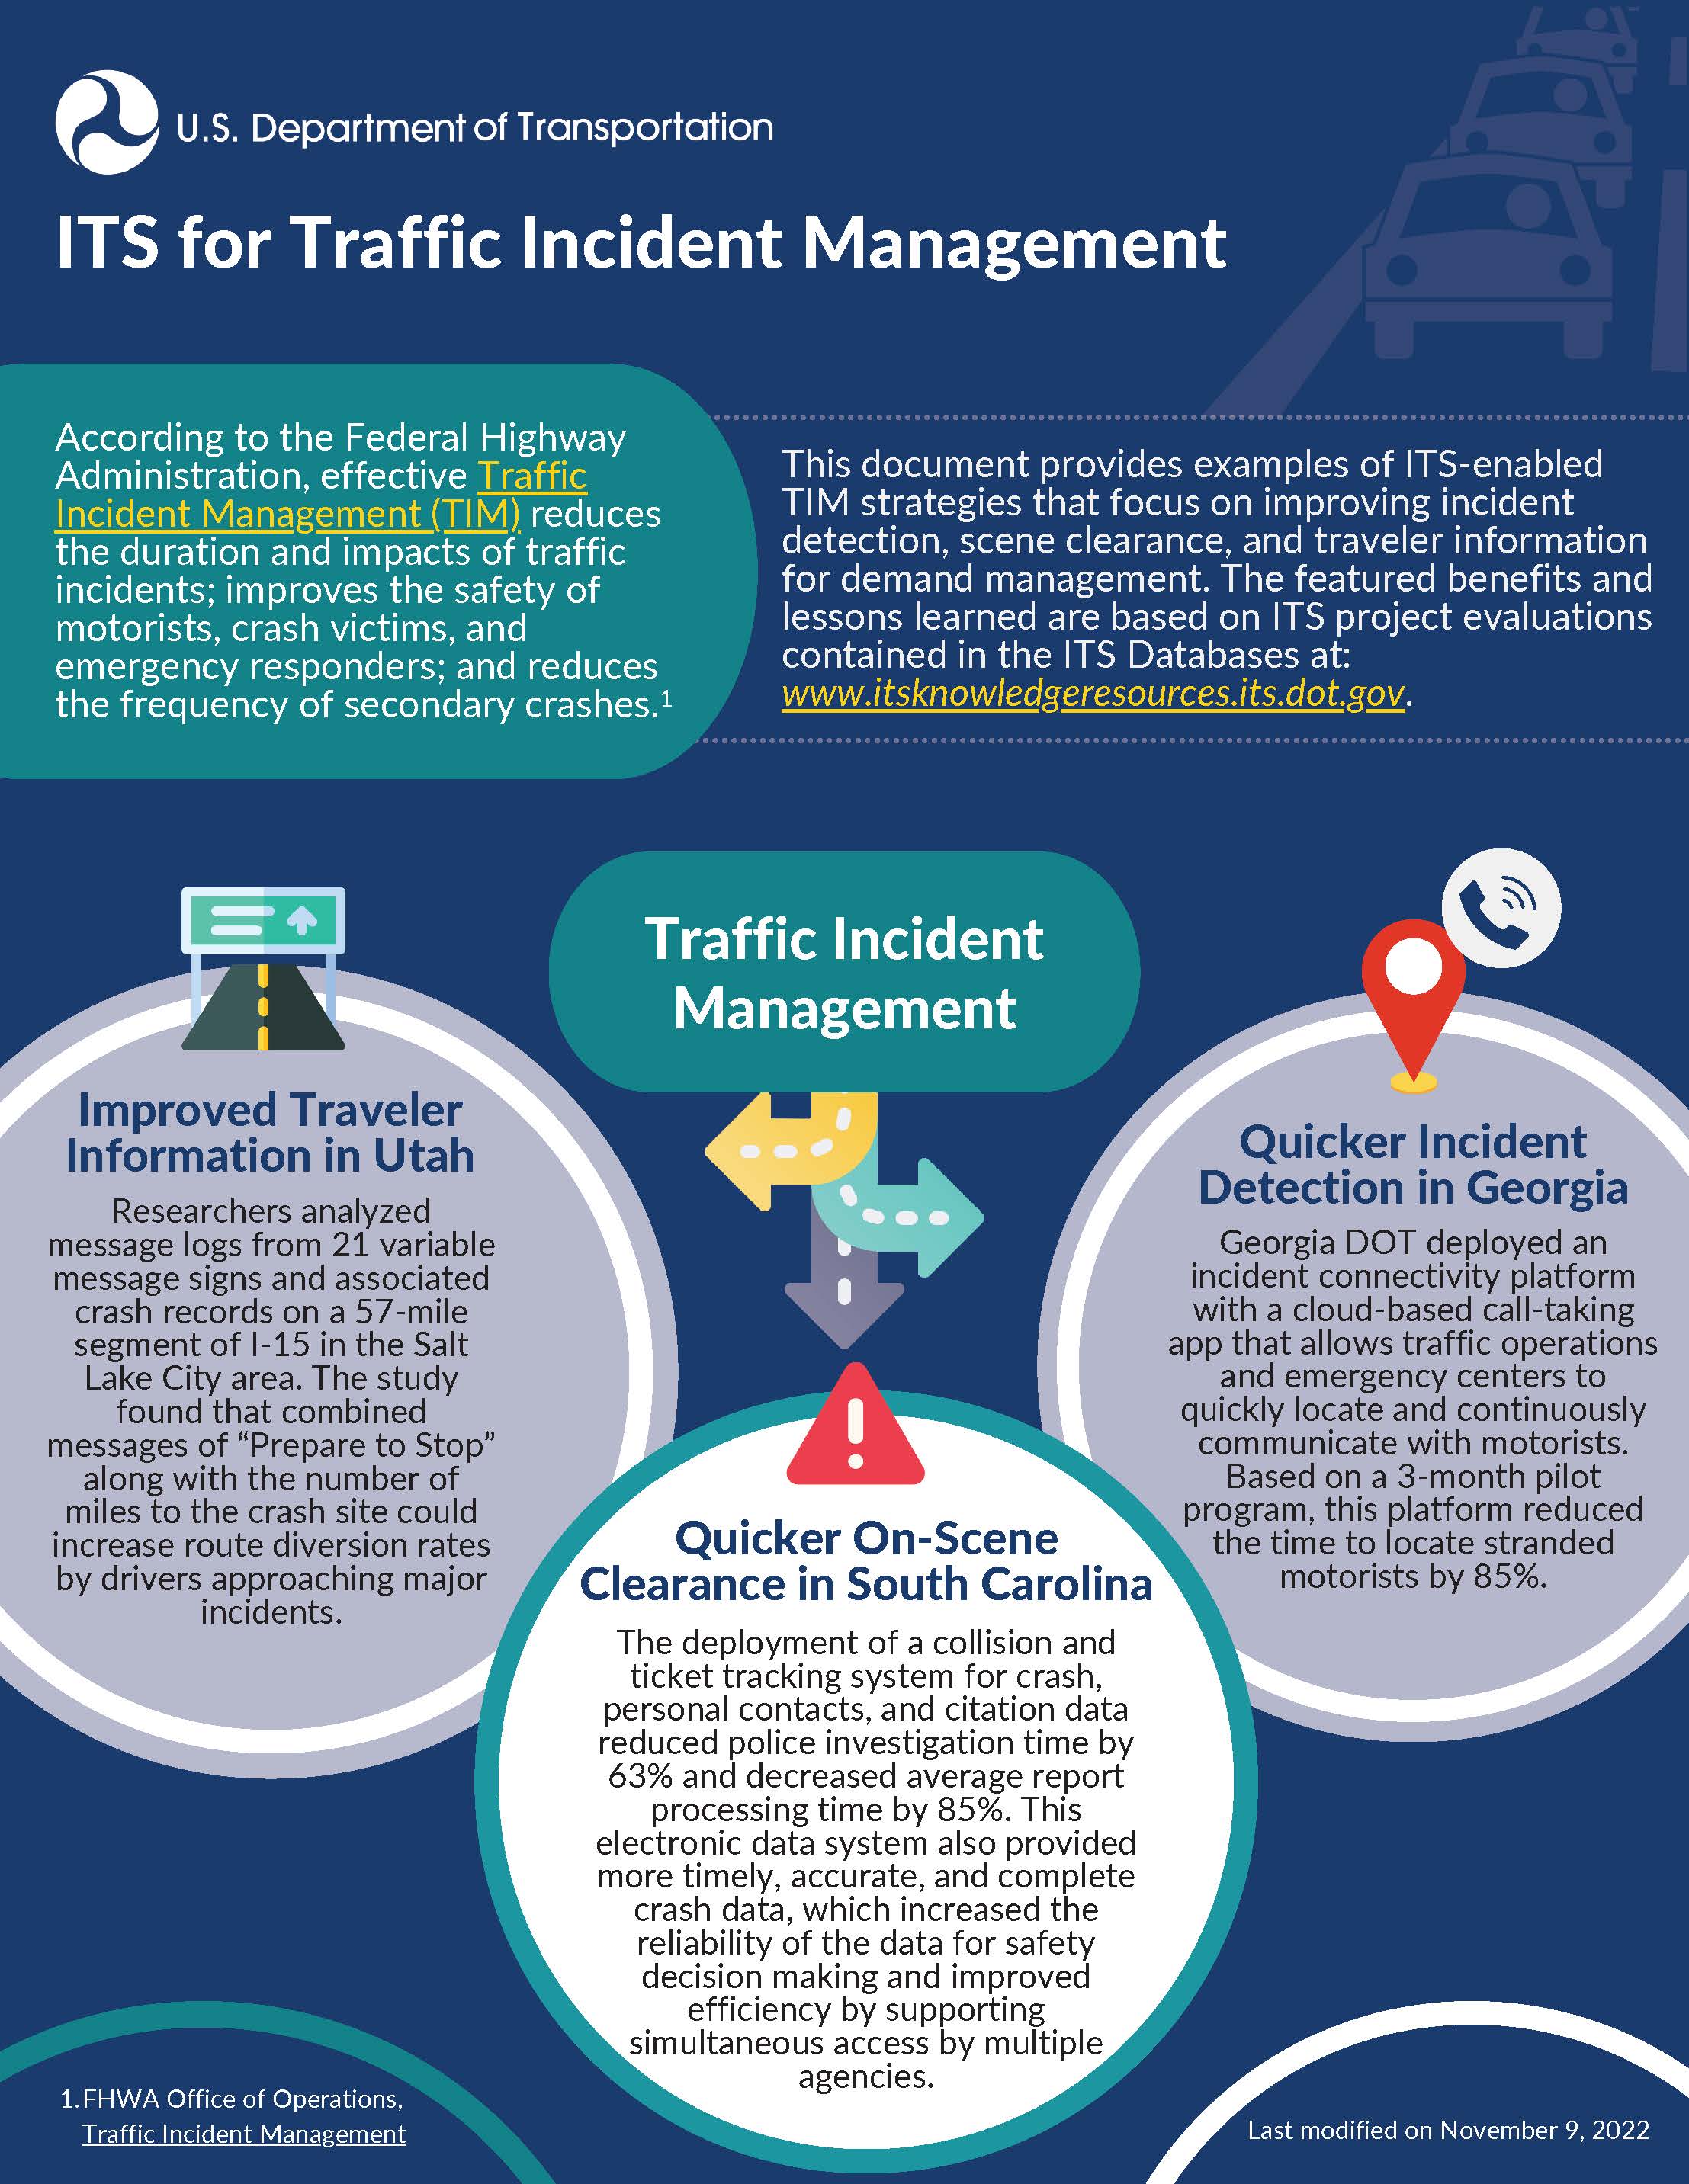 Infographic depicting examples of deployed ITS-enabled TIM strategies, improved traveler information in Utah, quicker on-scene clearance in South Carolina, and quicker incident detection in Georgia.